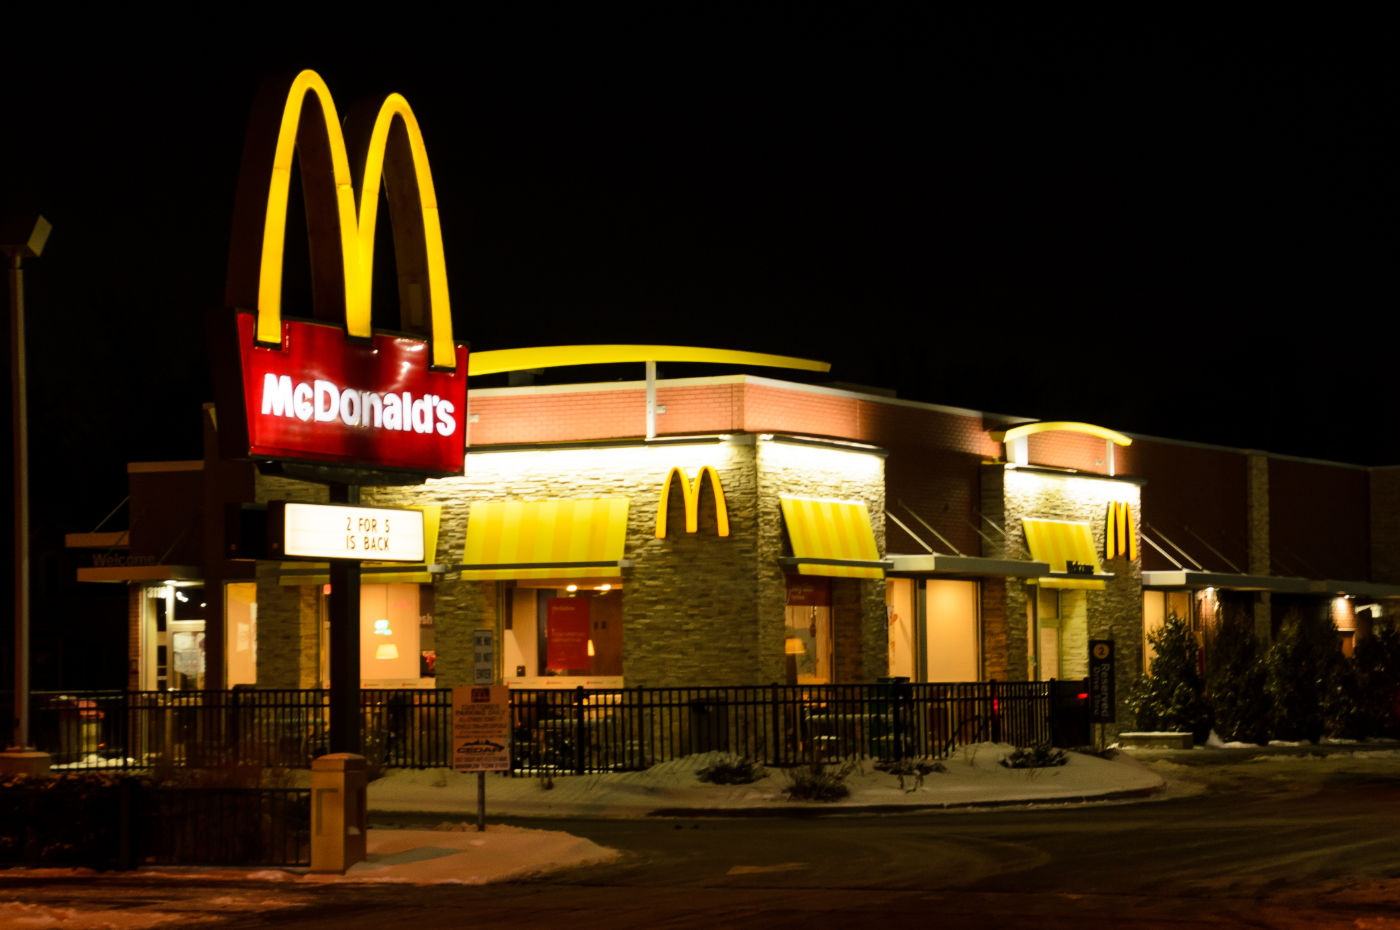 McDonald's restaurant outside at night with bright yellow lights and M-shaped arches atop red and white sign